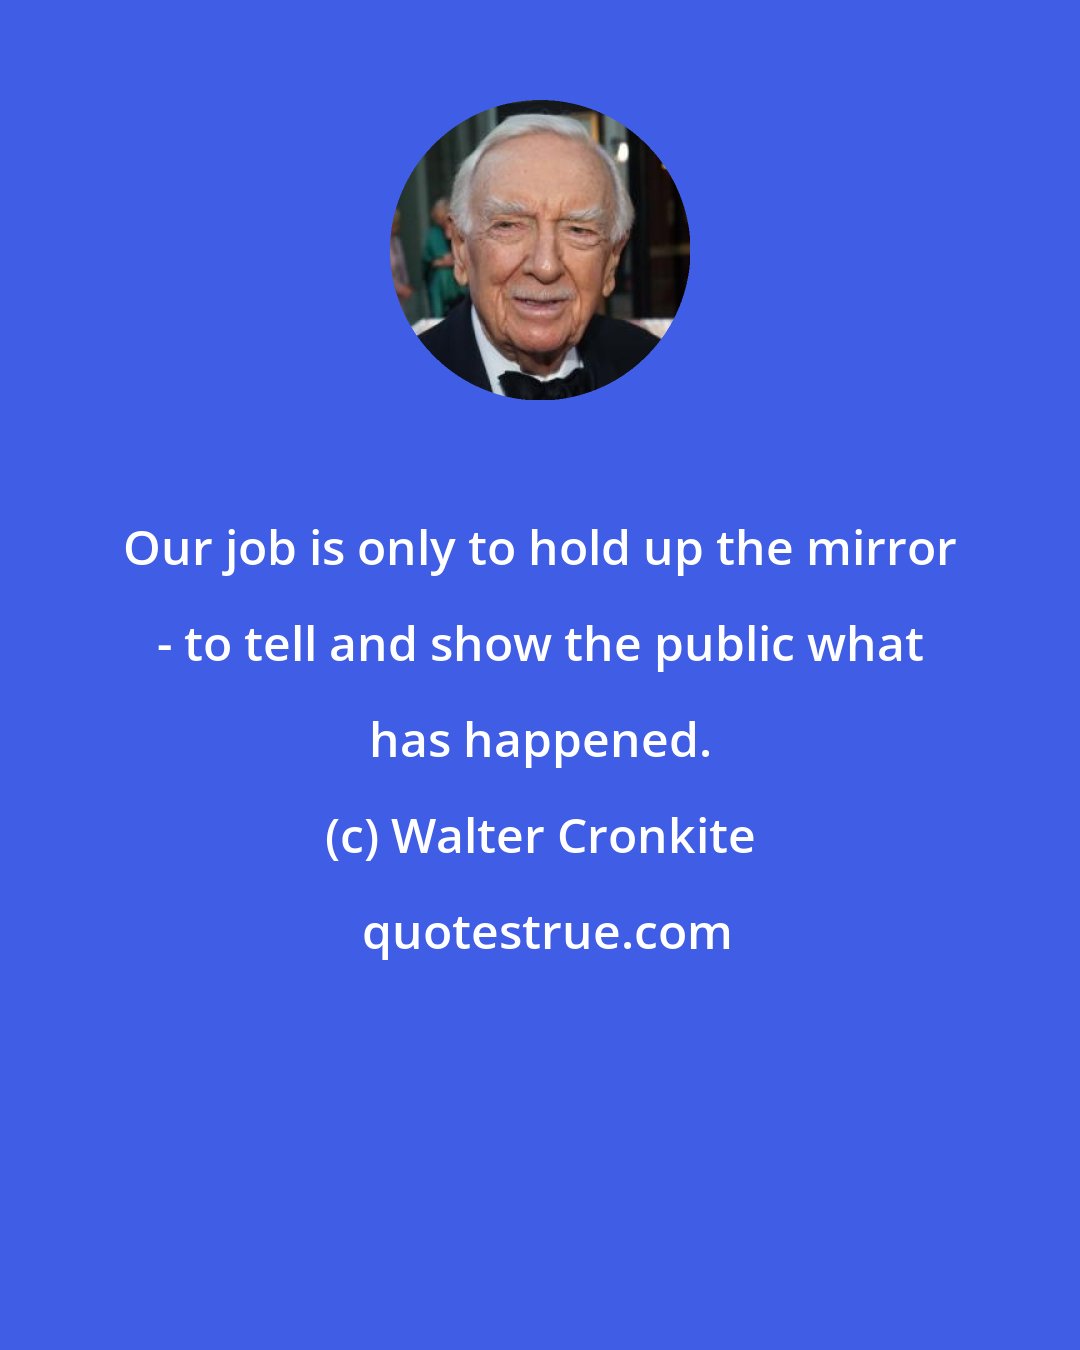 Walter Cronkite: Our job is only to hold up the mirror - to tell and show the public what has happened.